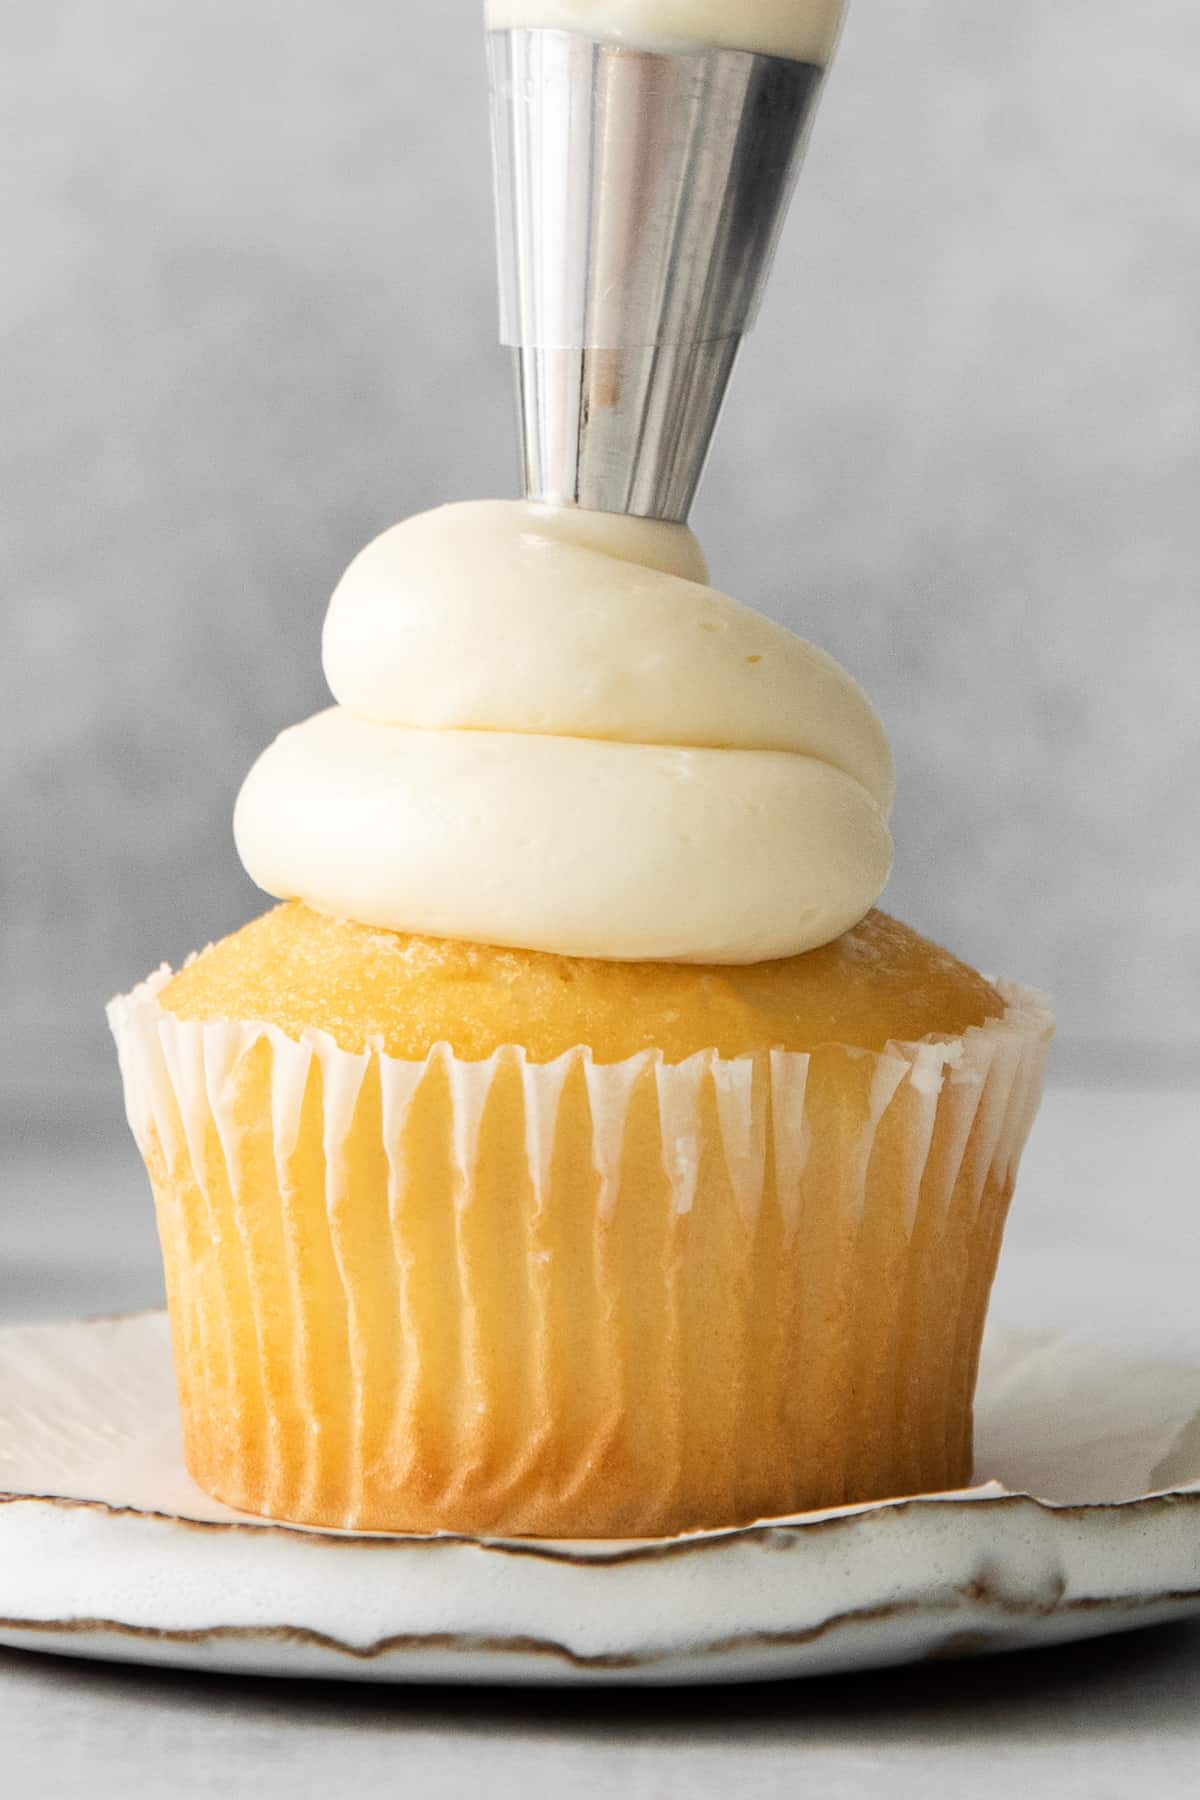 Mascarpone frosting being piped onto a cupcake.